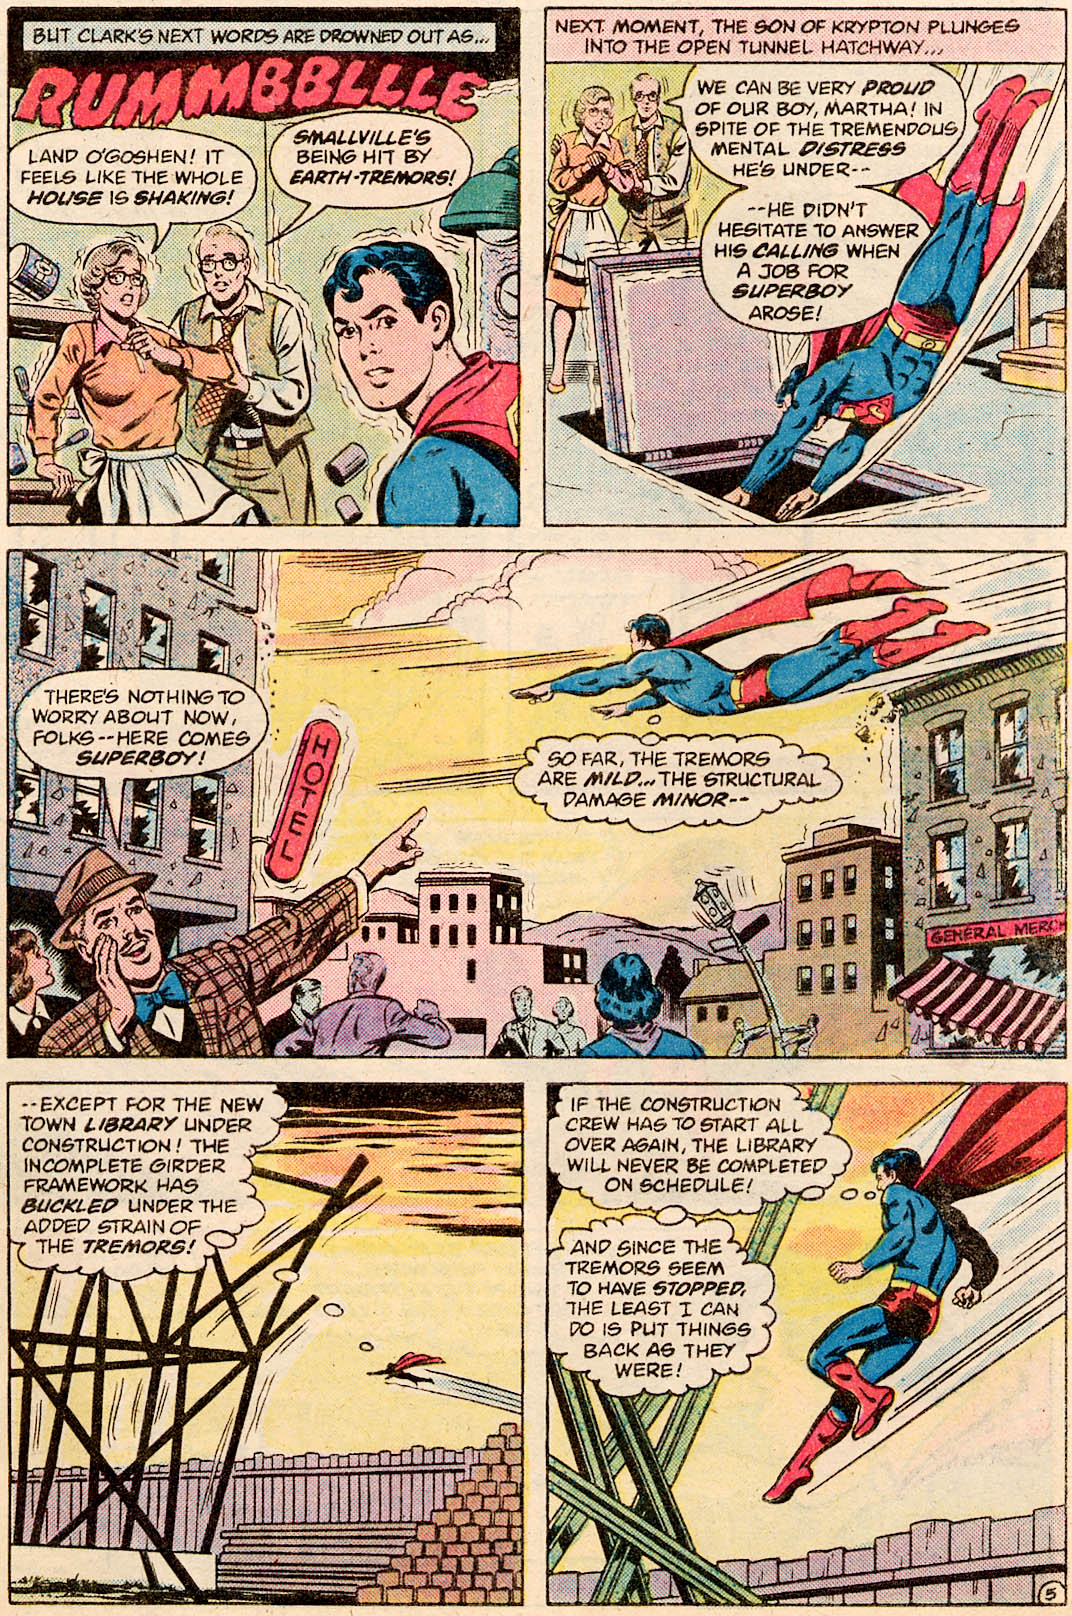 The New Adventures of Superboy 28 Page 5